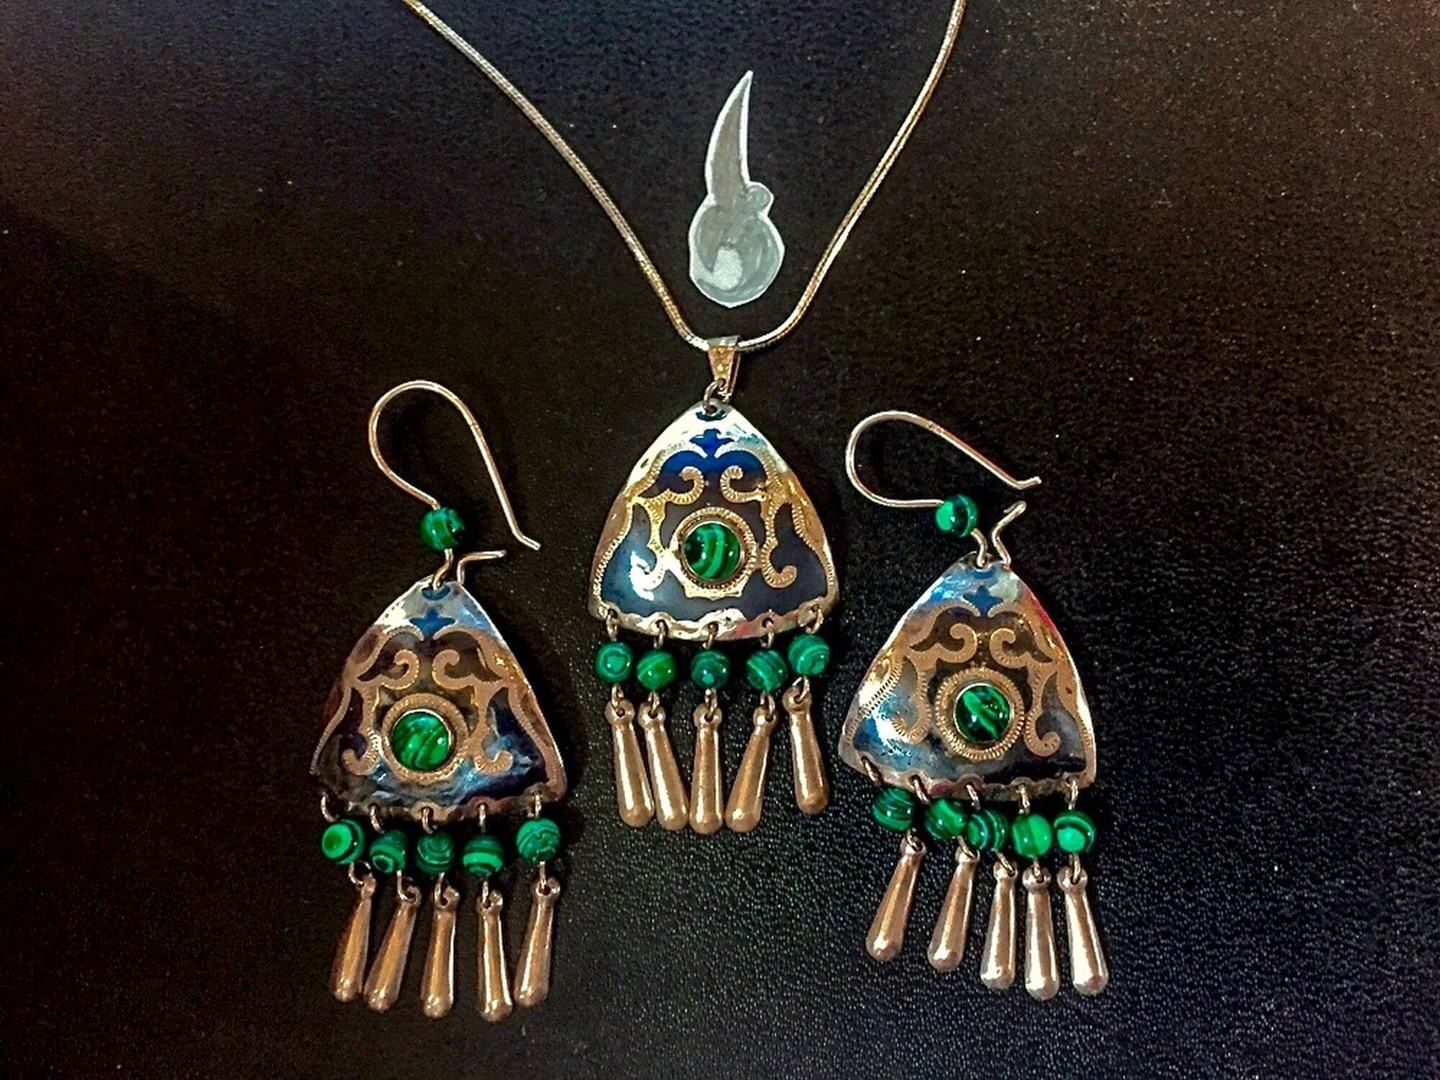 Central Asia Ornaments, earrings